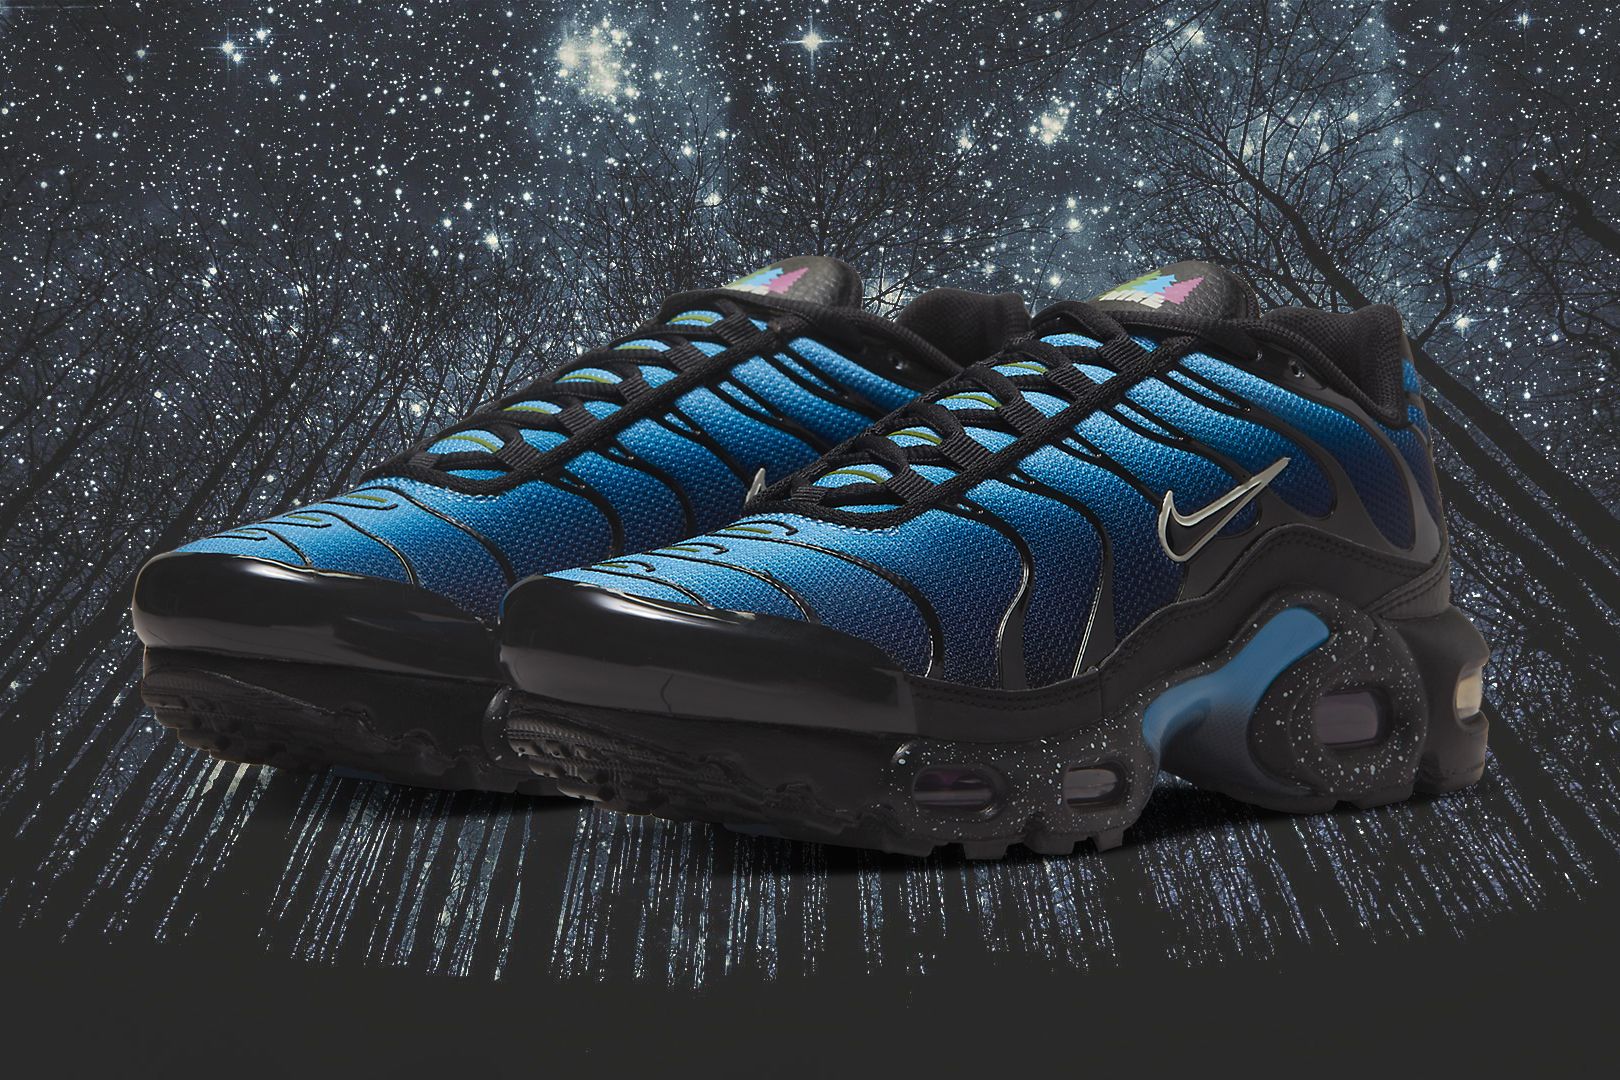 Nike Take the Air Max Plus To the Great Outdoors